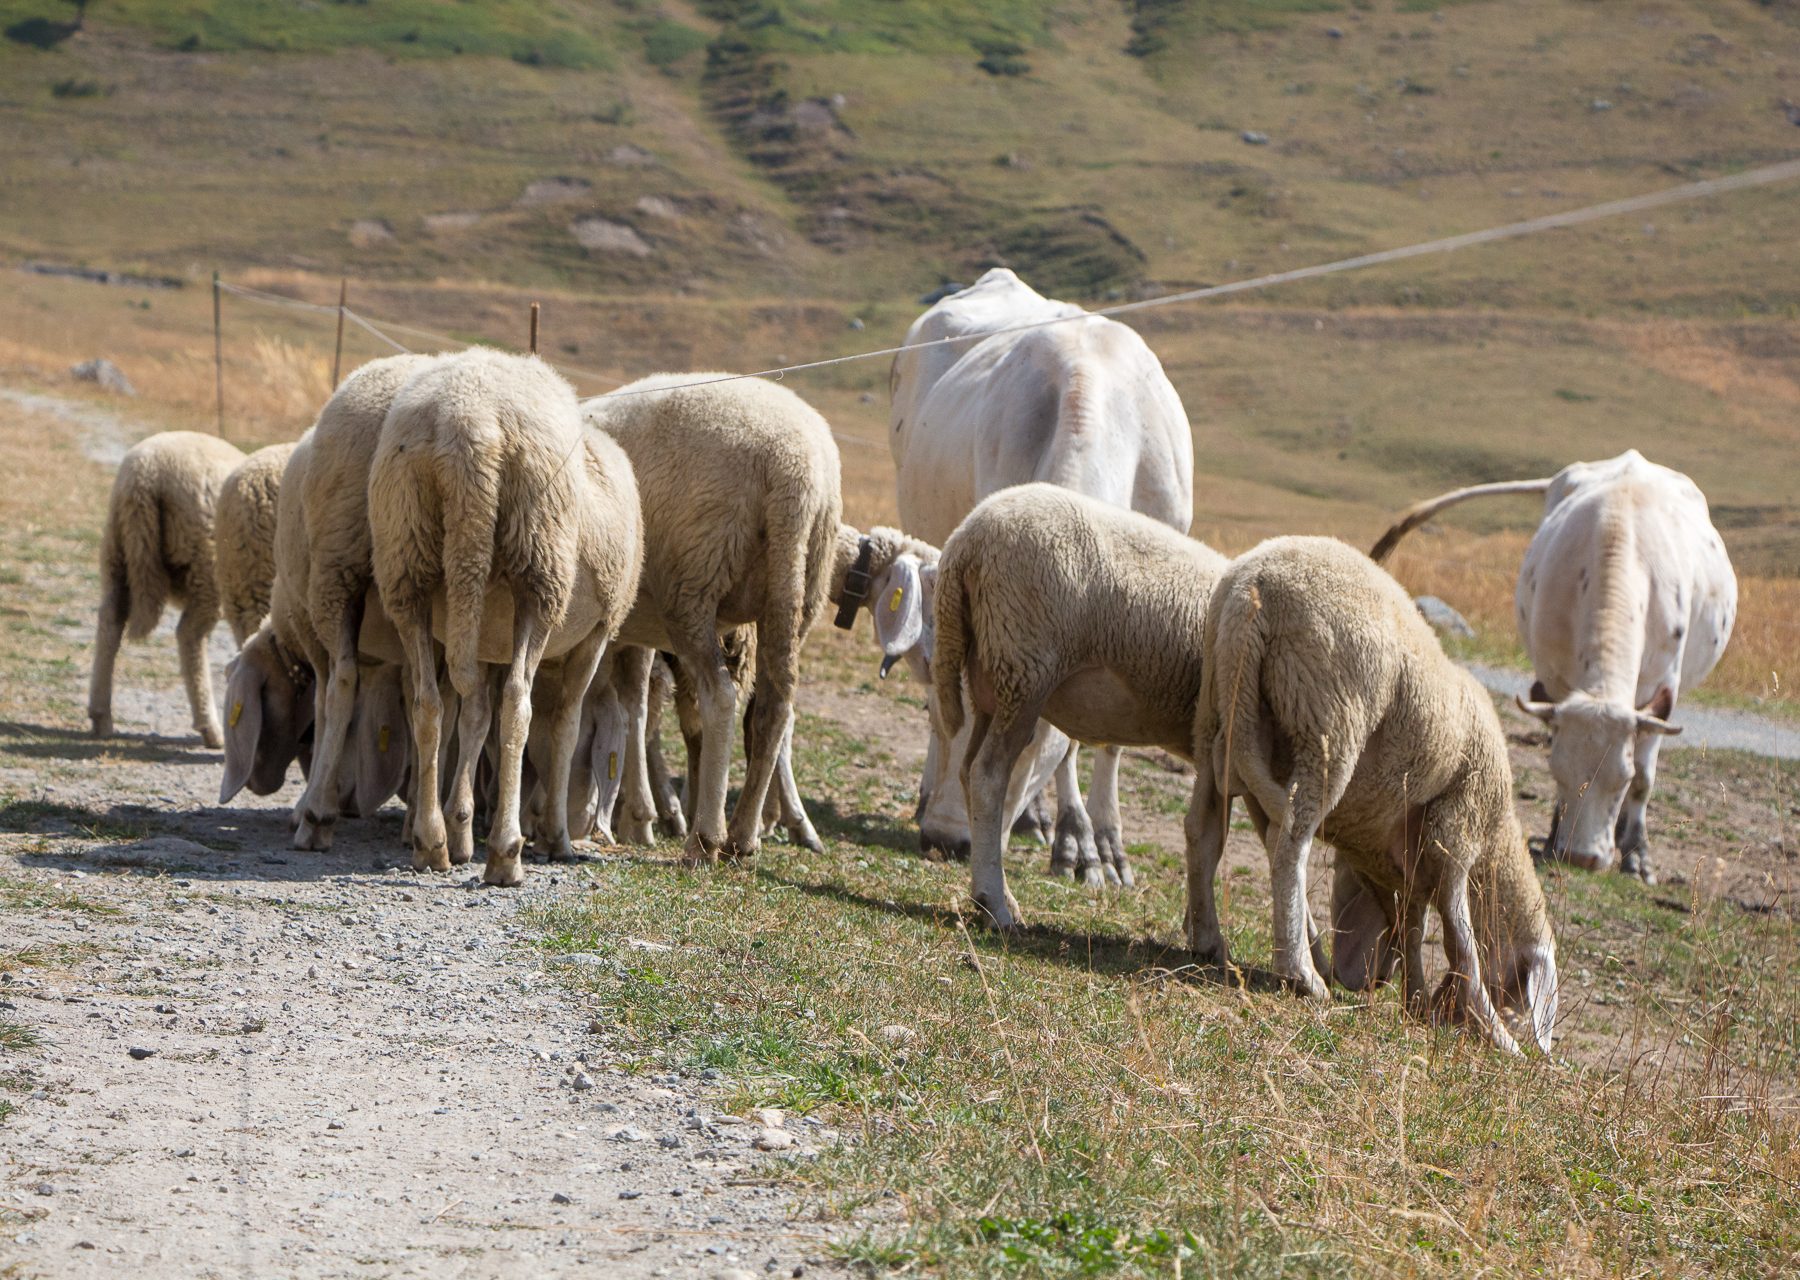 Sheep at Pian dell'Alpe, Usseaux, 2017